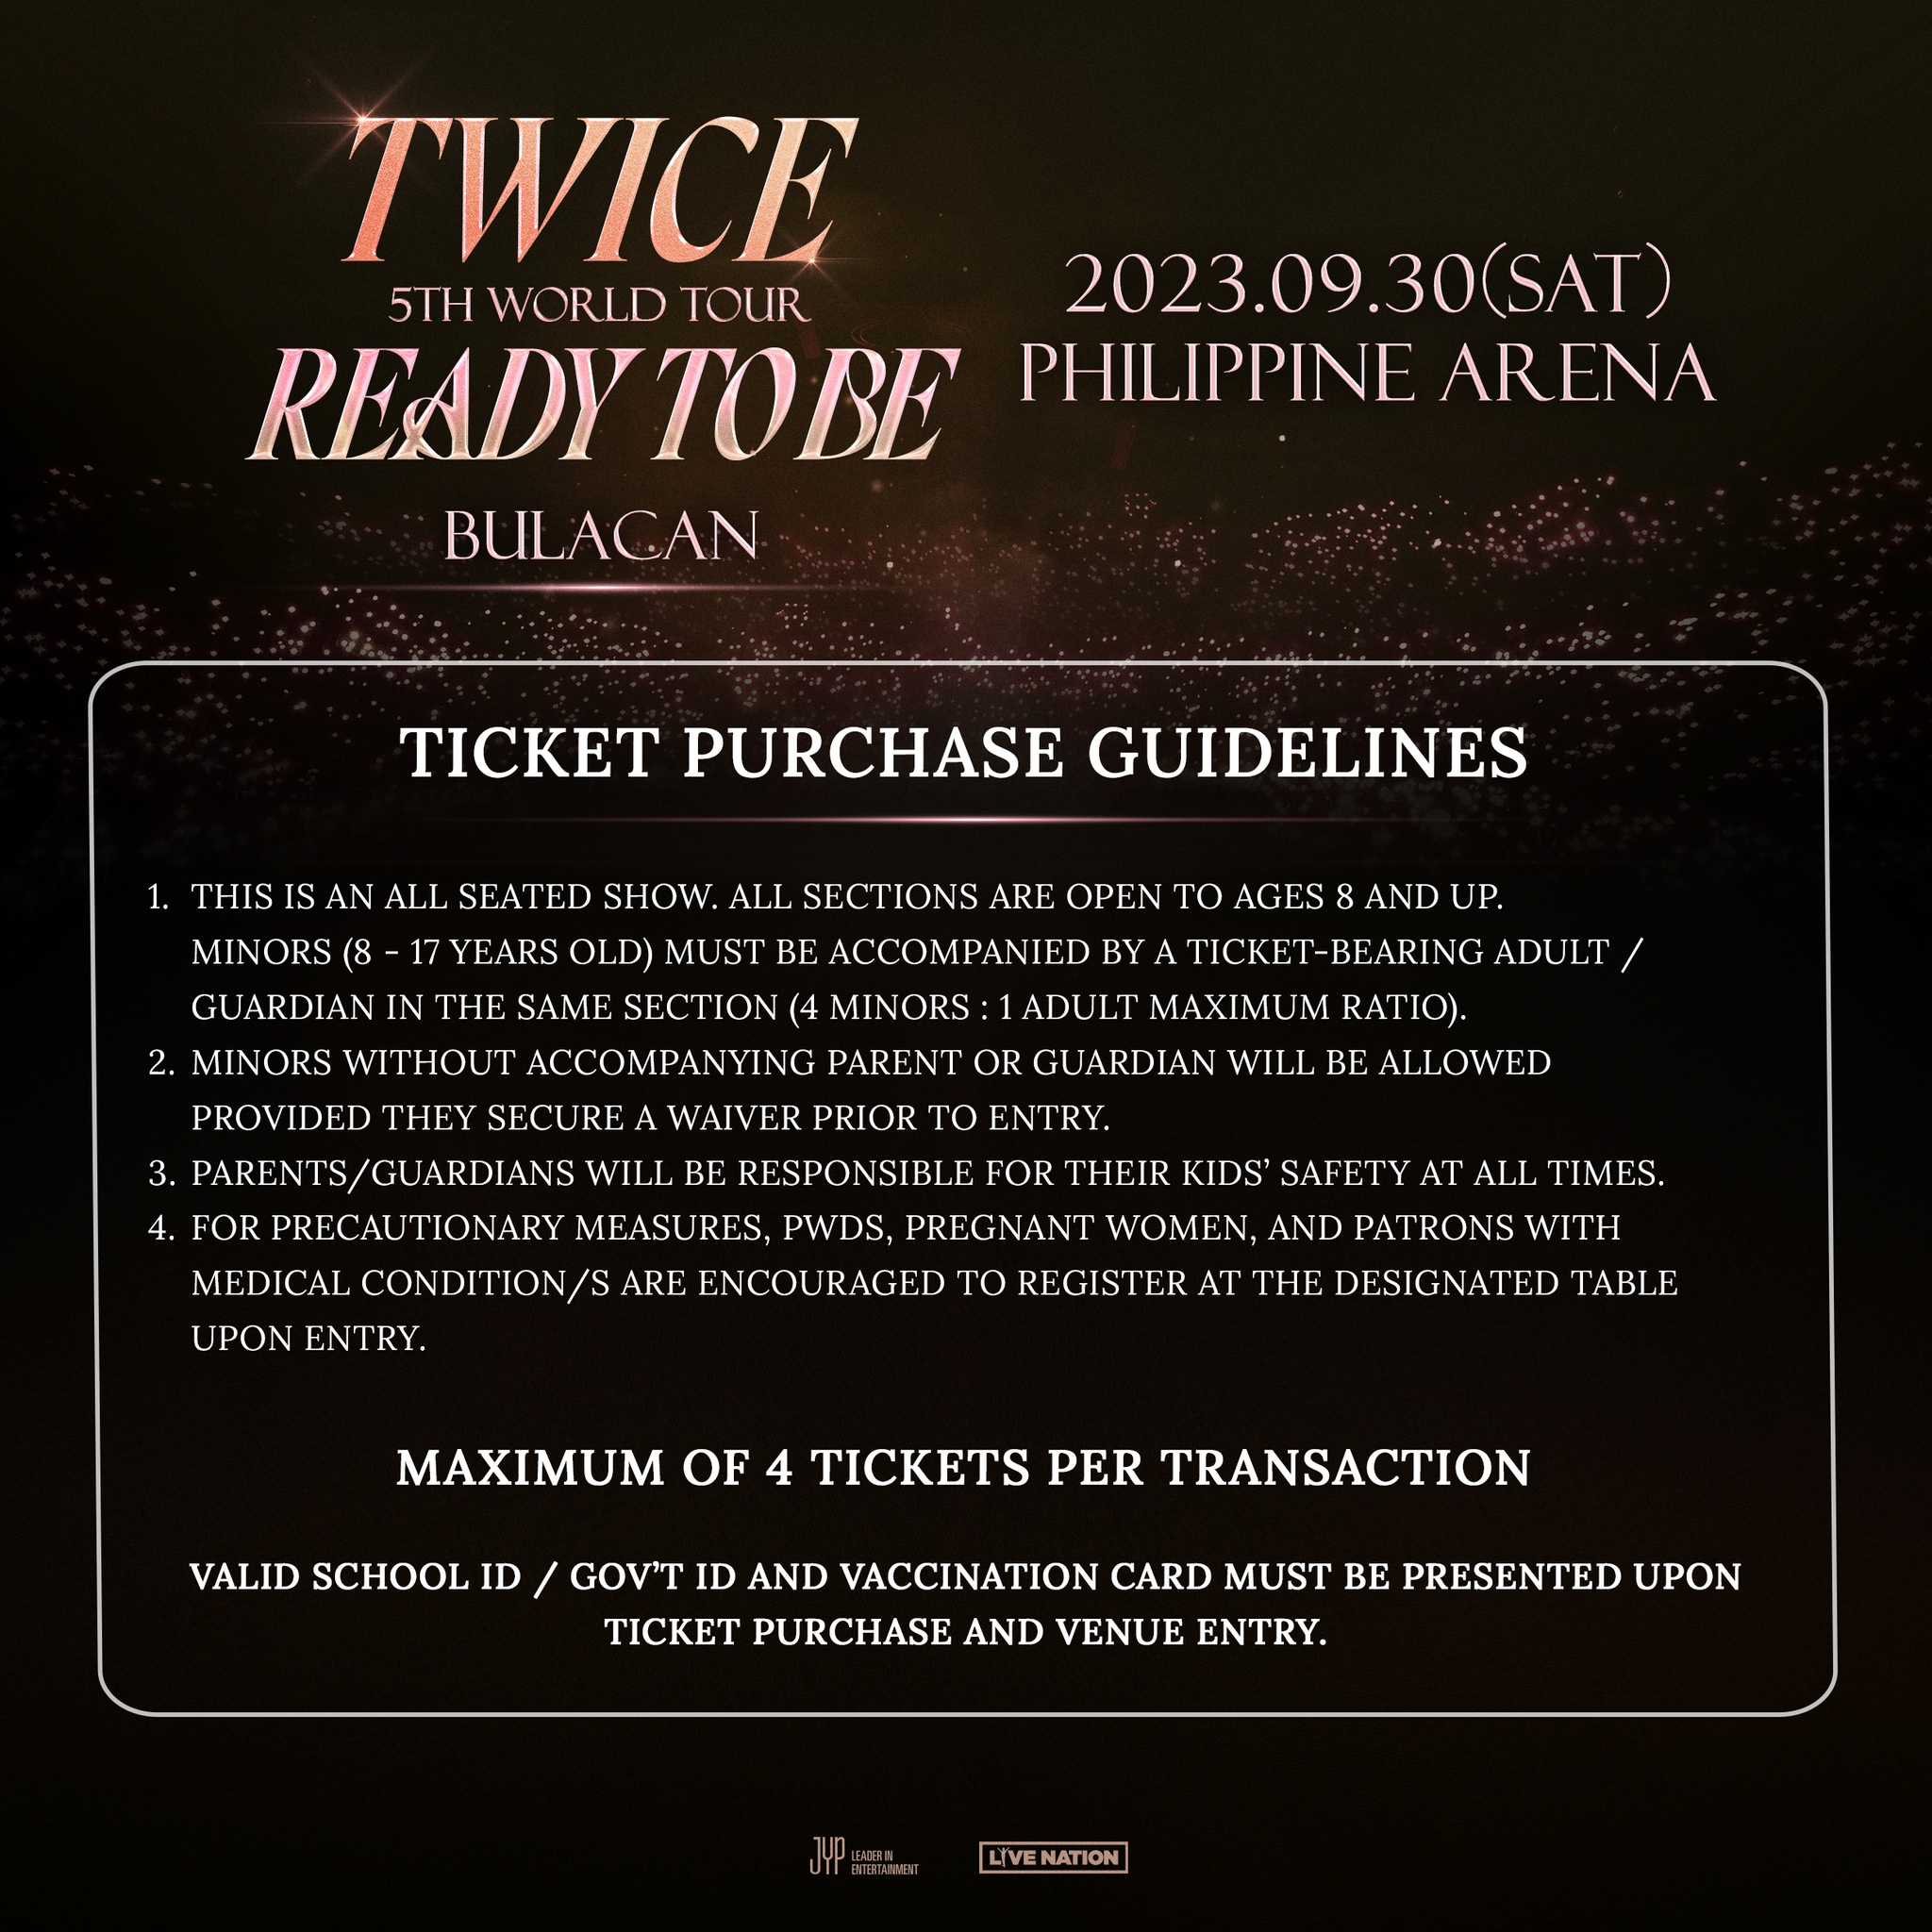 KPop Girl Group TWICE Returns to the Philippines on September 2023